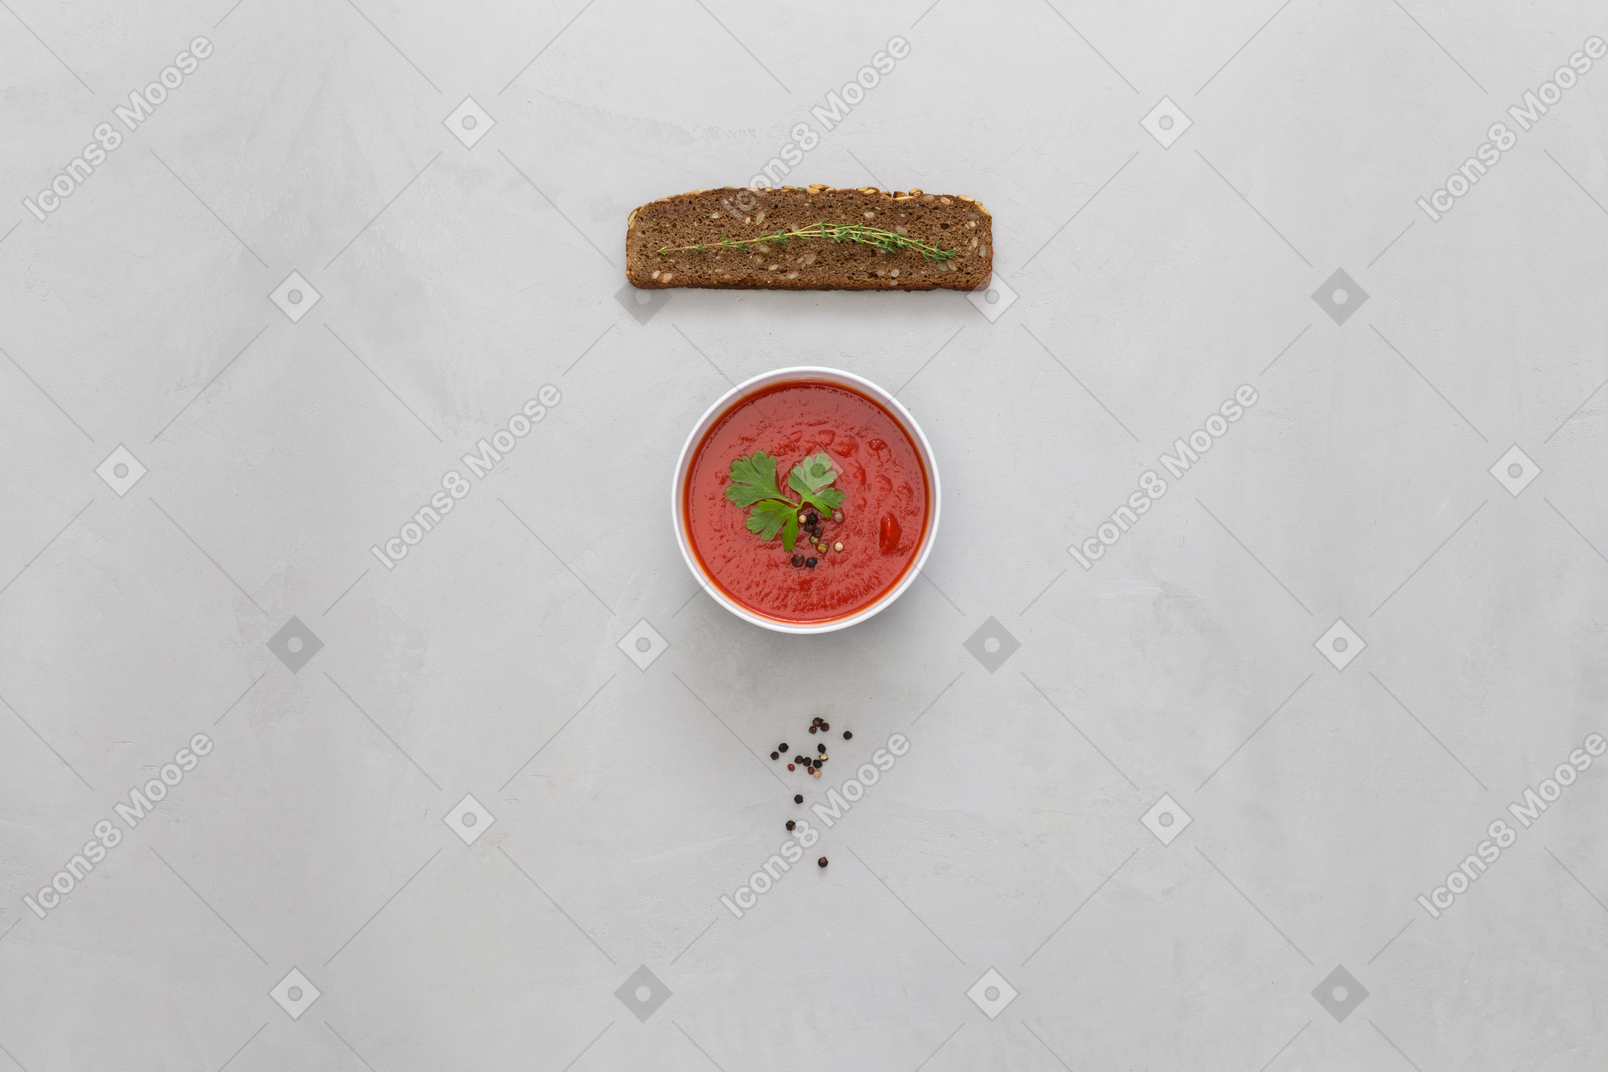 Well, how about tomato taste snack?